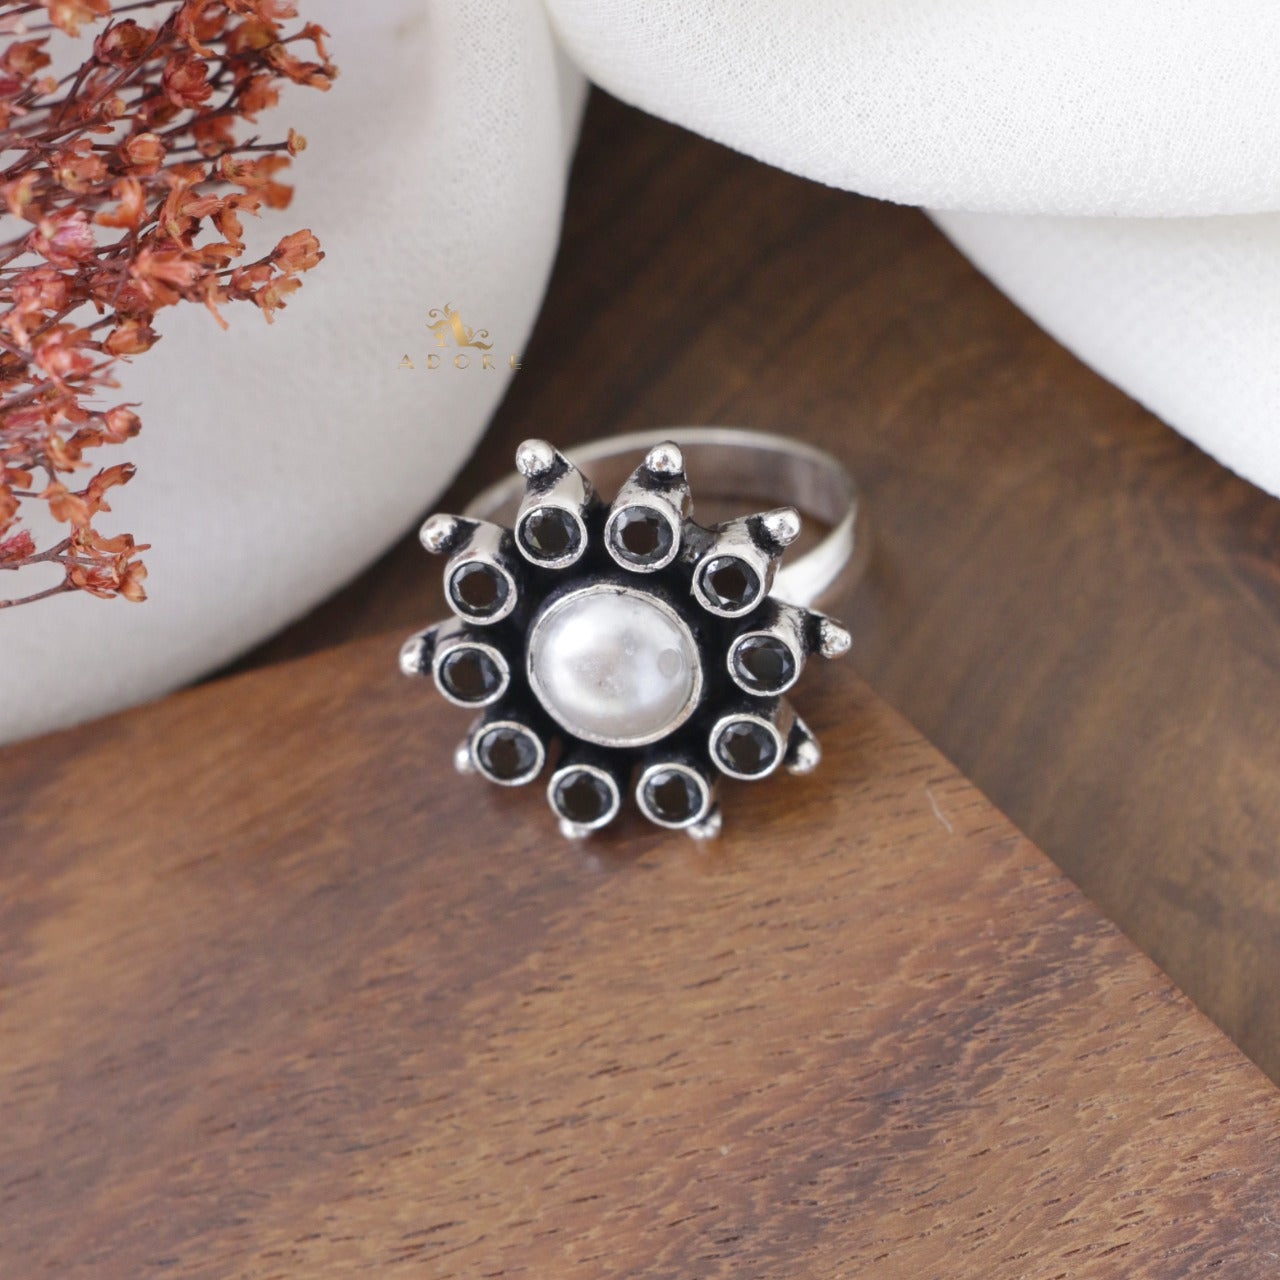 Swanet Adjustable Ring